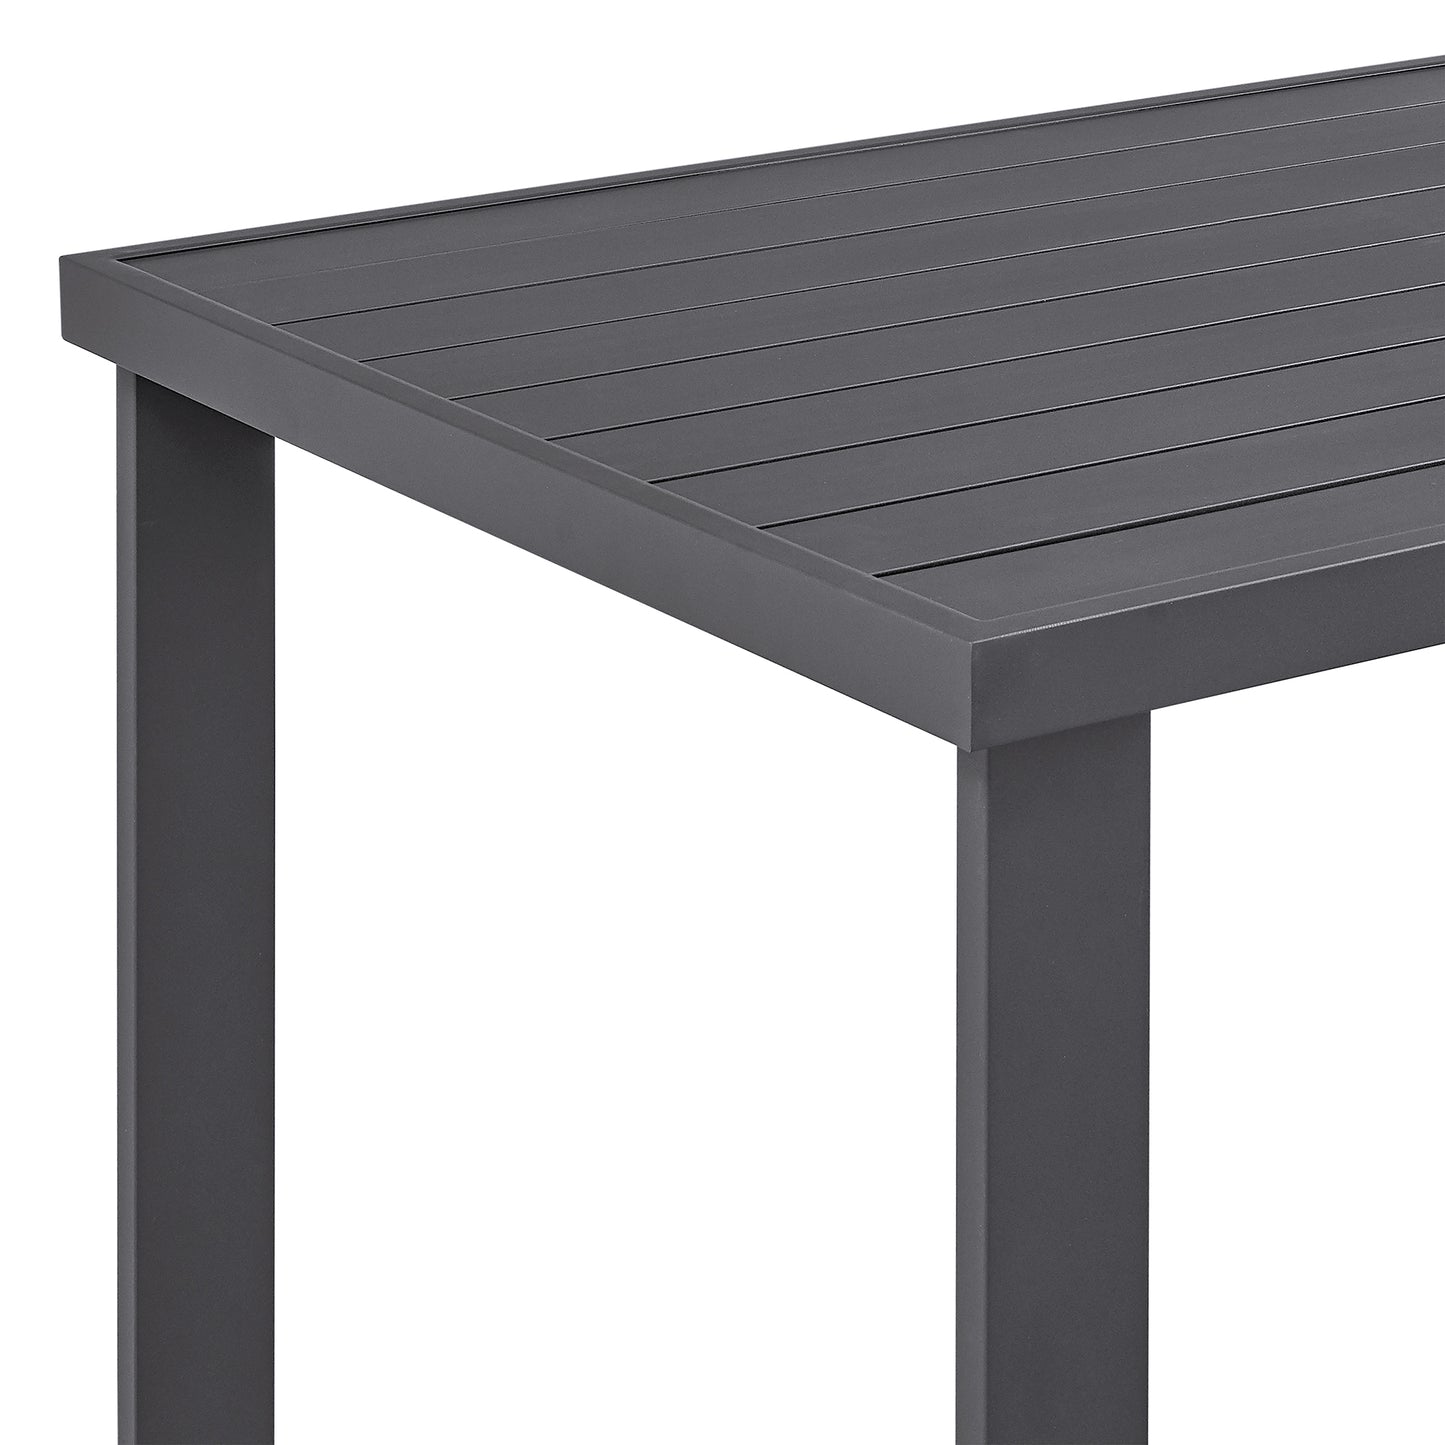 Argiope Outdoor Patio 5-Piece Bar Table Set in Aluminum with Gray Cushions